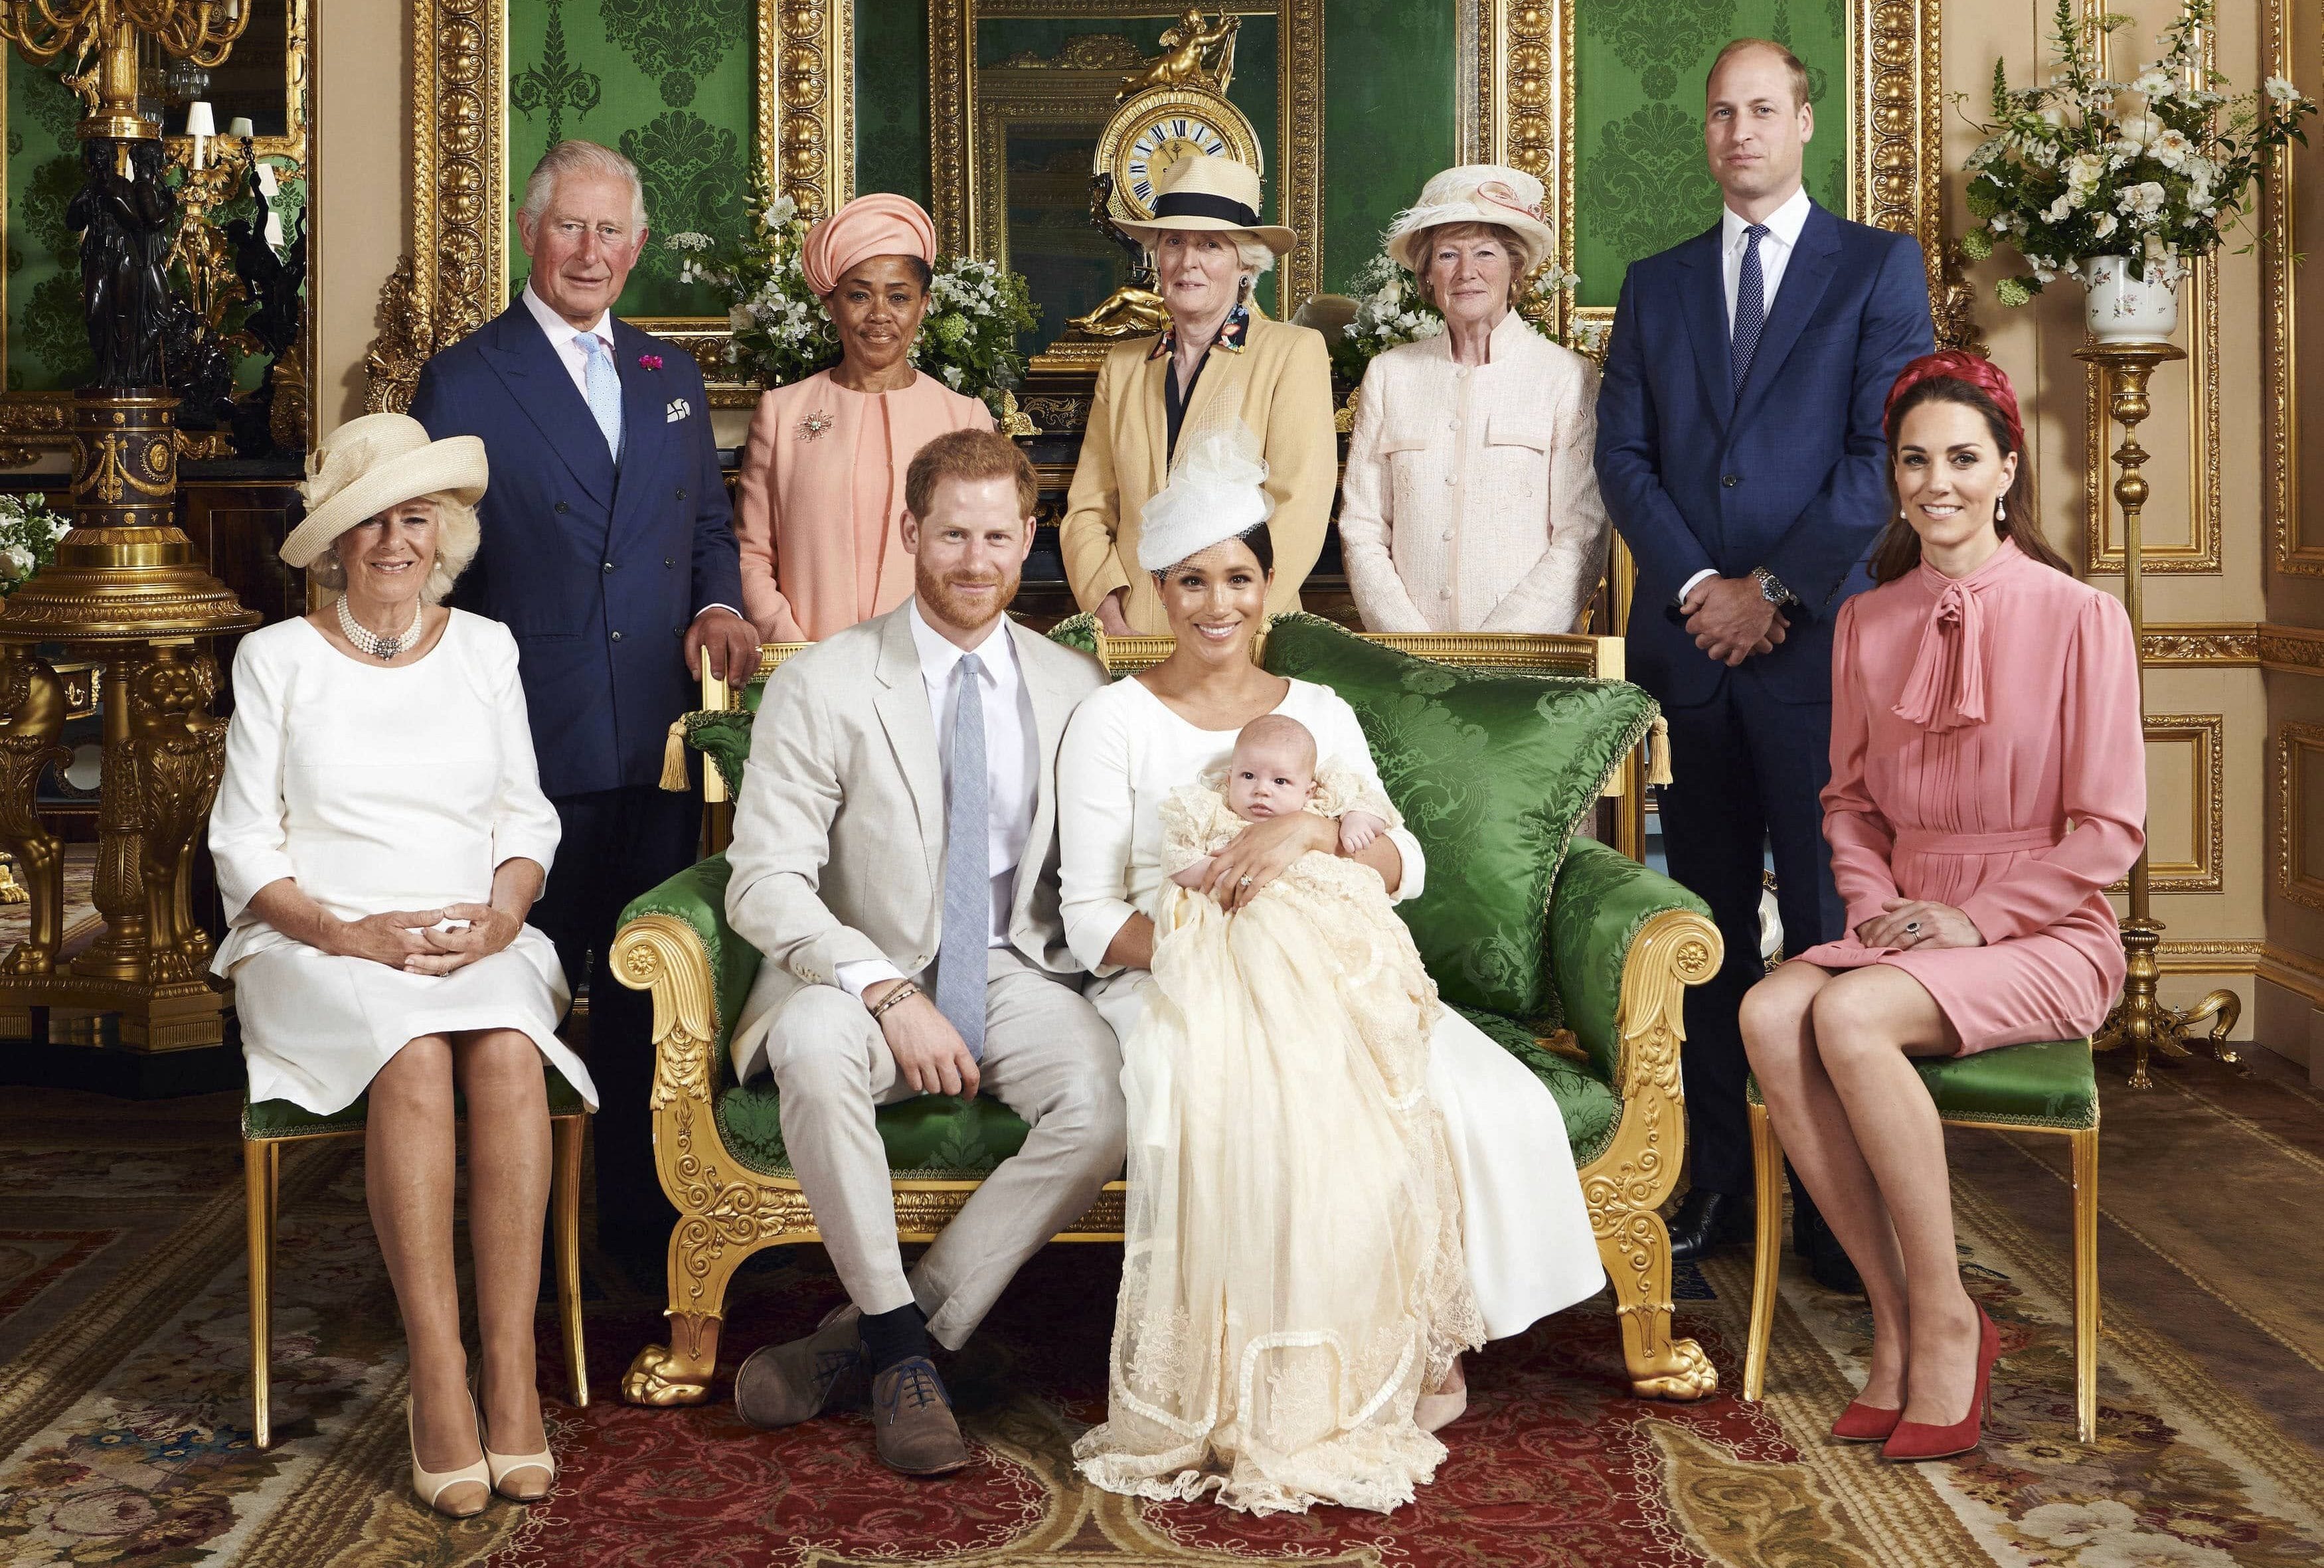 Prince Harry and Meghans son Archie christened in private service